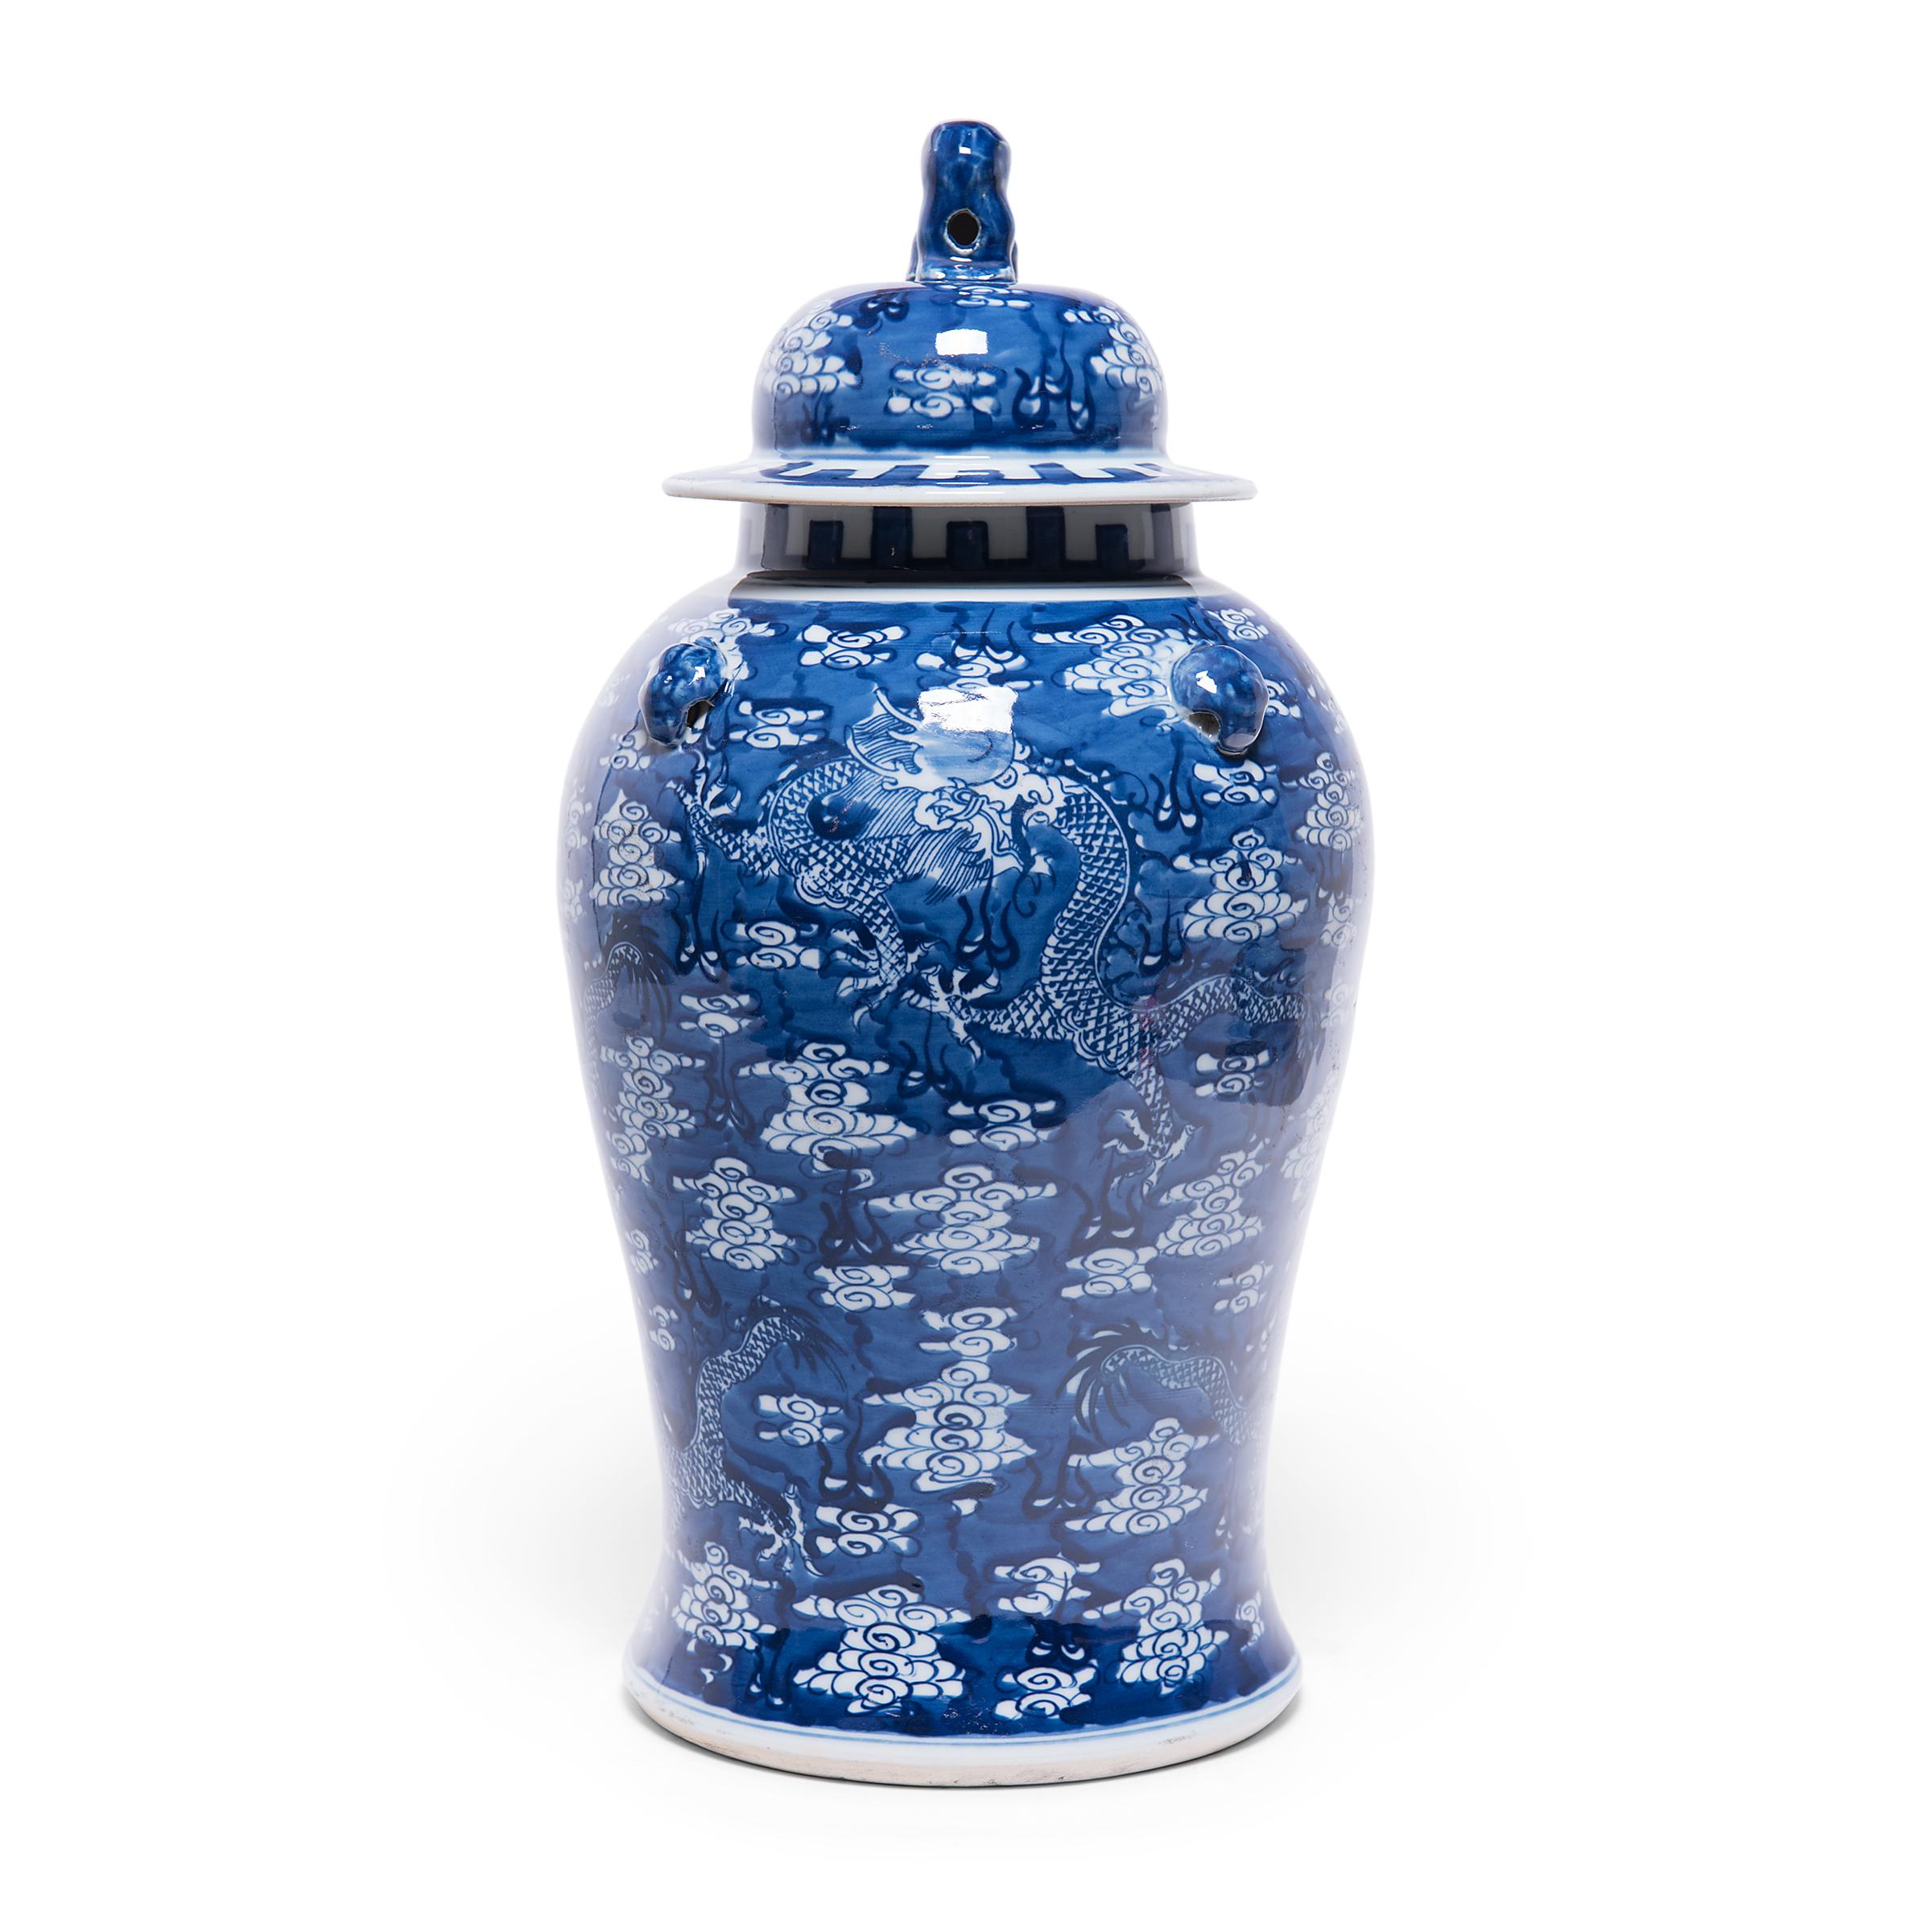 These contemporary lidded baluster jars continue the centuries-old tradition of Chinese blue-and-white porcelain ware. Painted with cobalt pigments for a brilliant blue finish, each jar is decorated with a scene of serpentine dragons soaring through